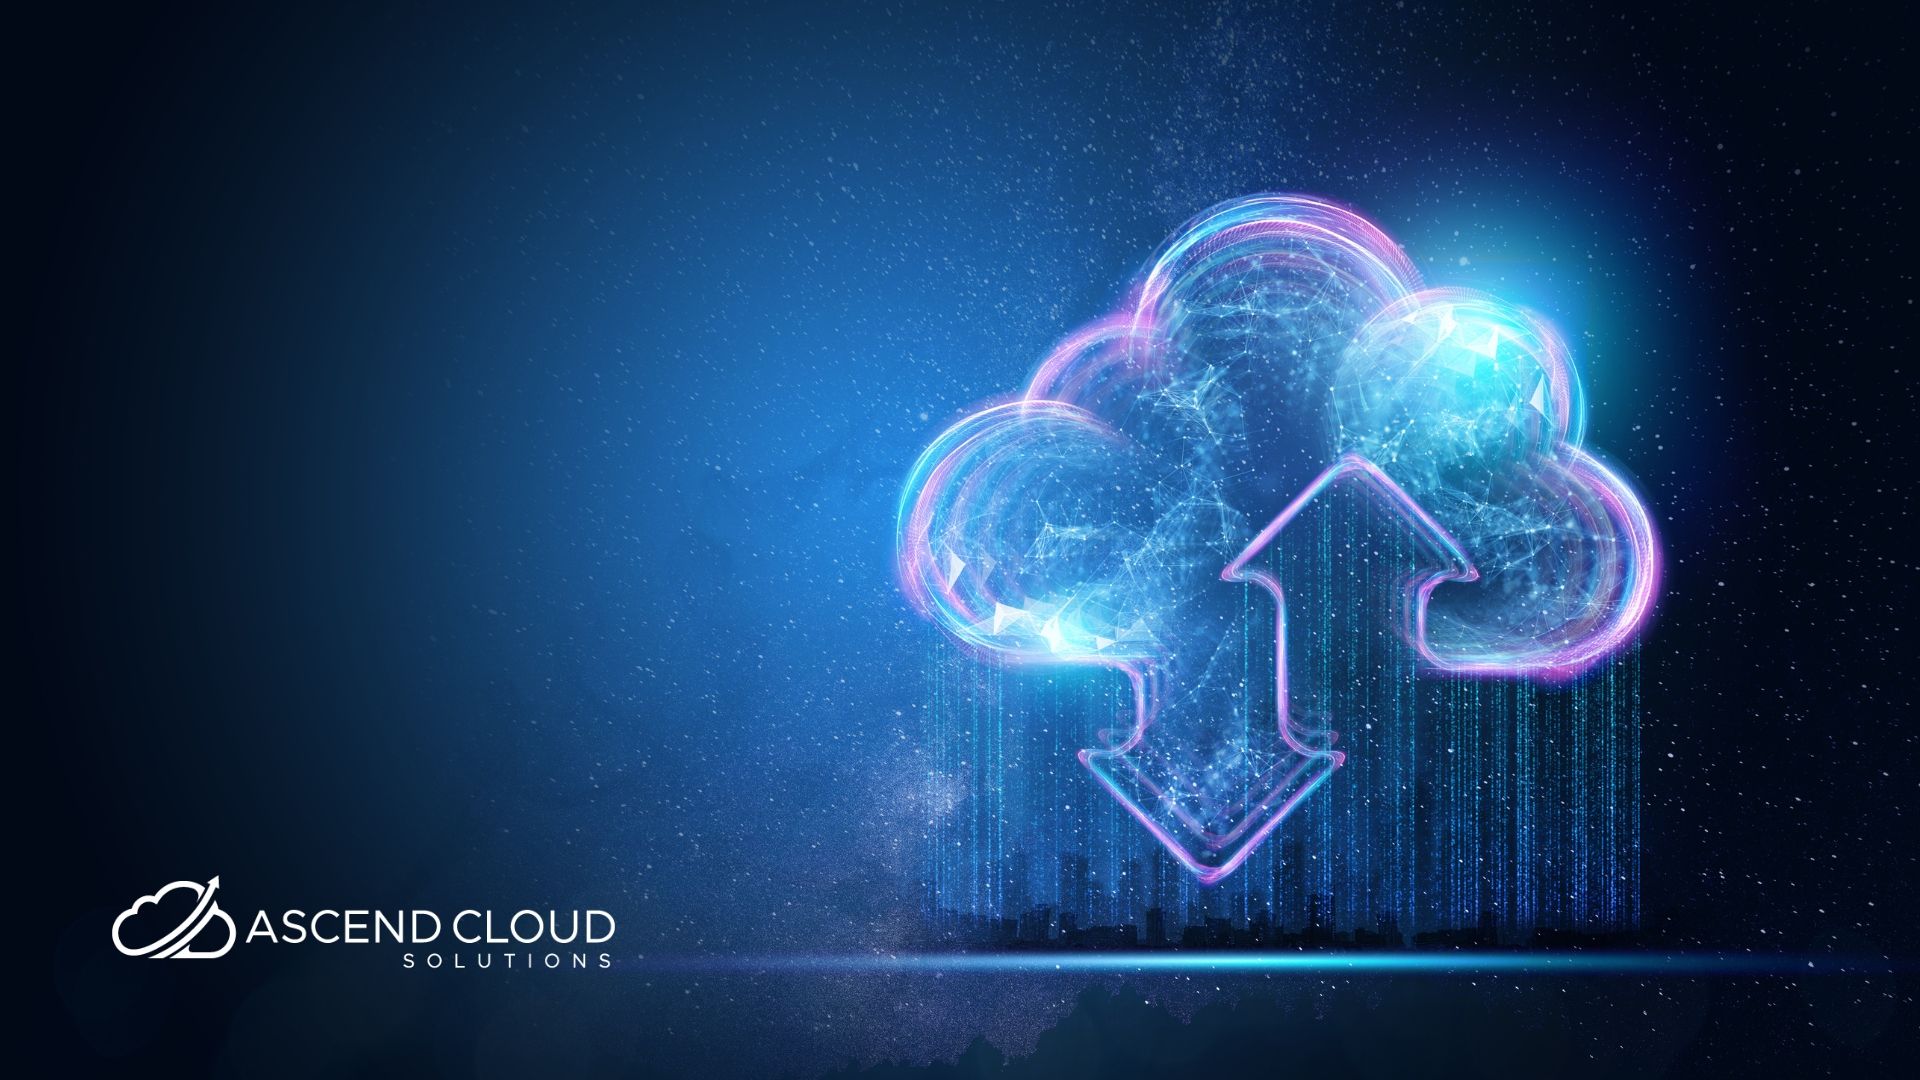 Public cloud scalability has been increasing since its inception. But can this go on forever? Or is there a limit to be reached? Discover more in our article.
